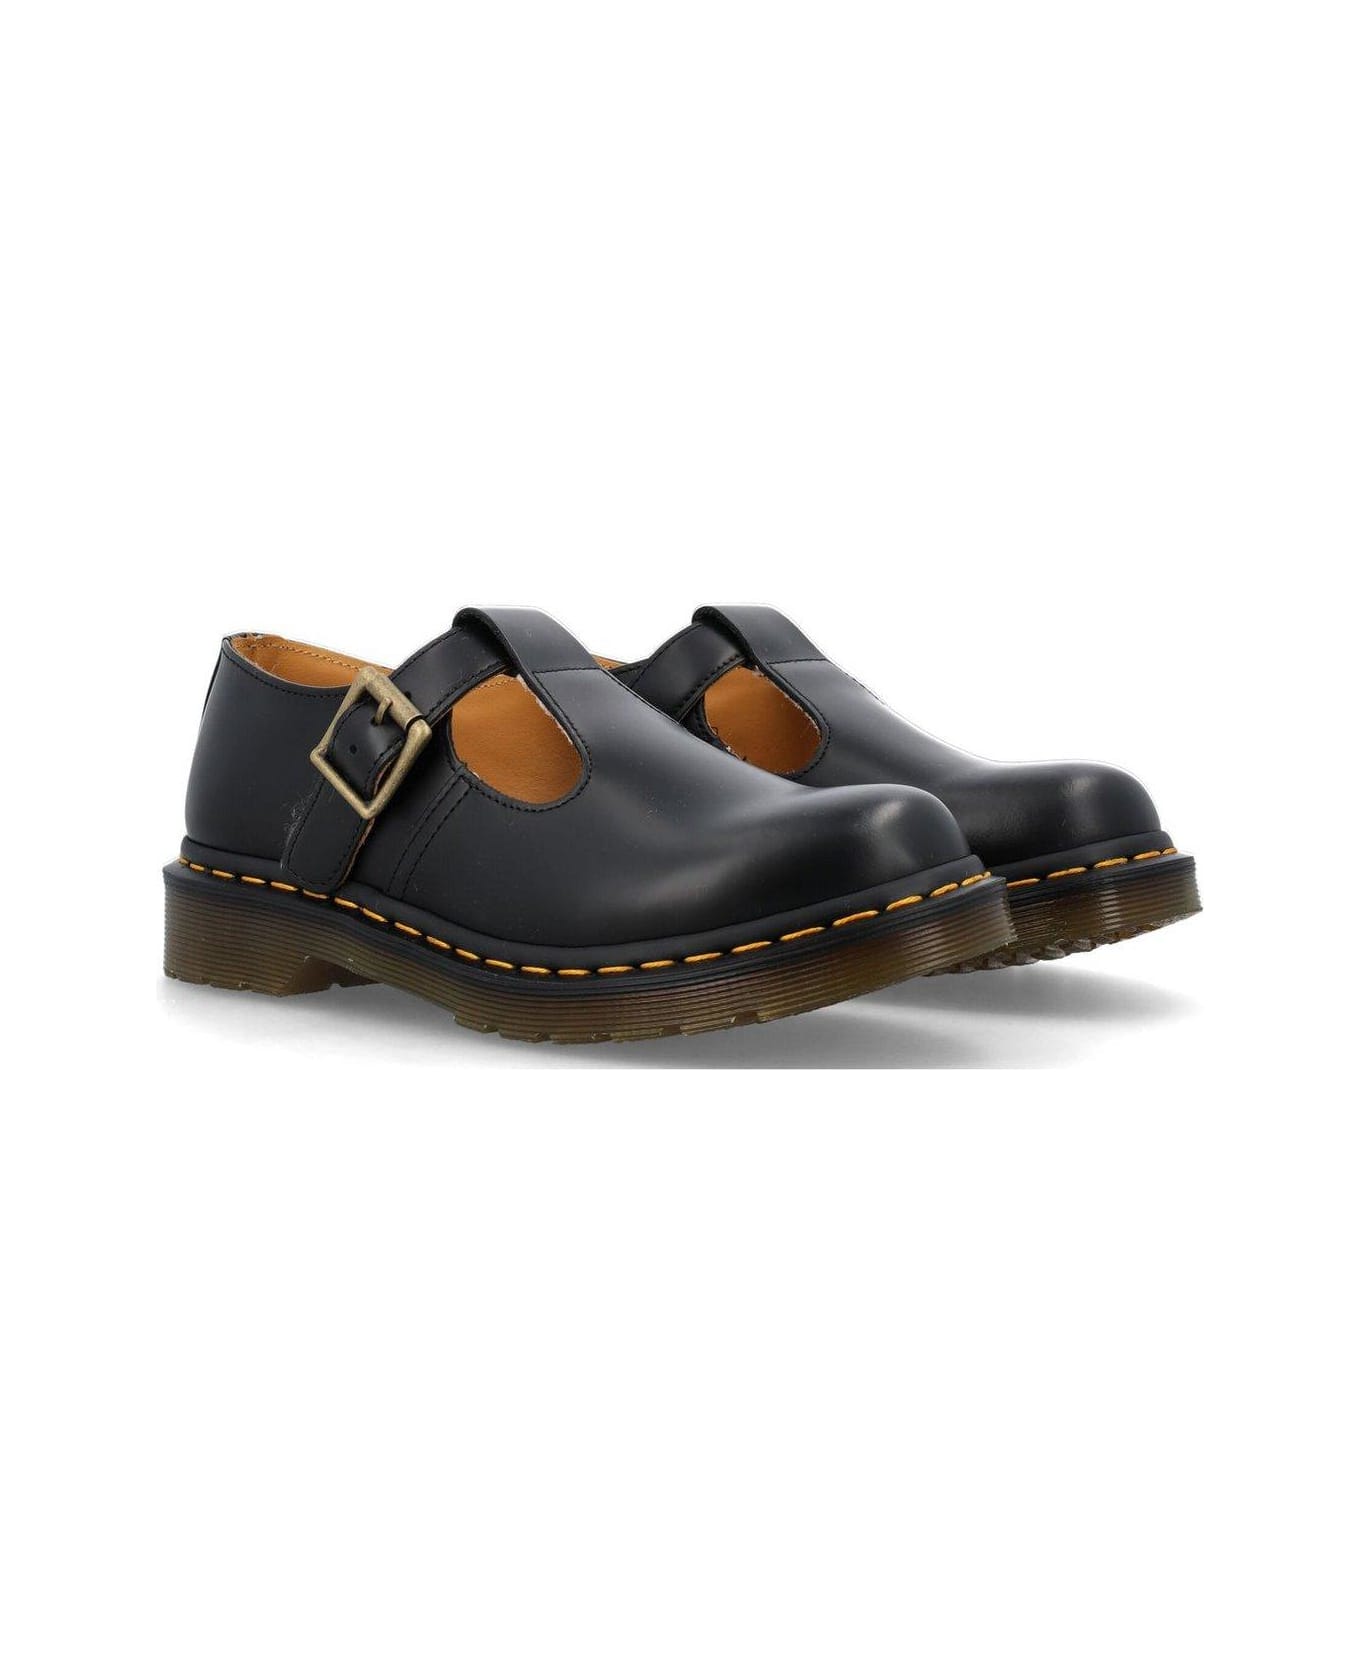 Dr. Martens Polley Mary Jane Flat Shoes - Black Smooth